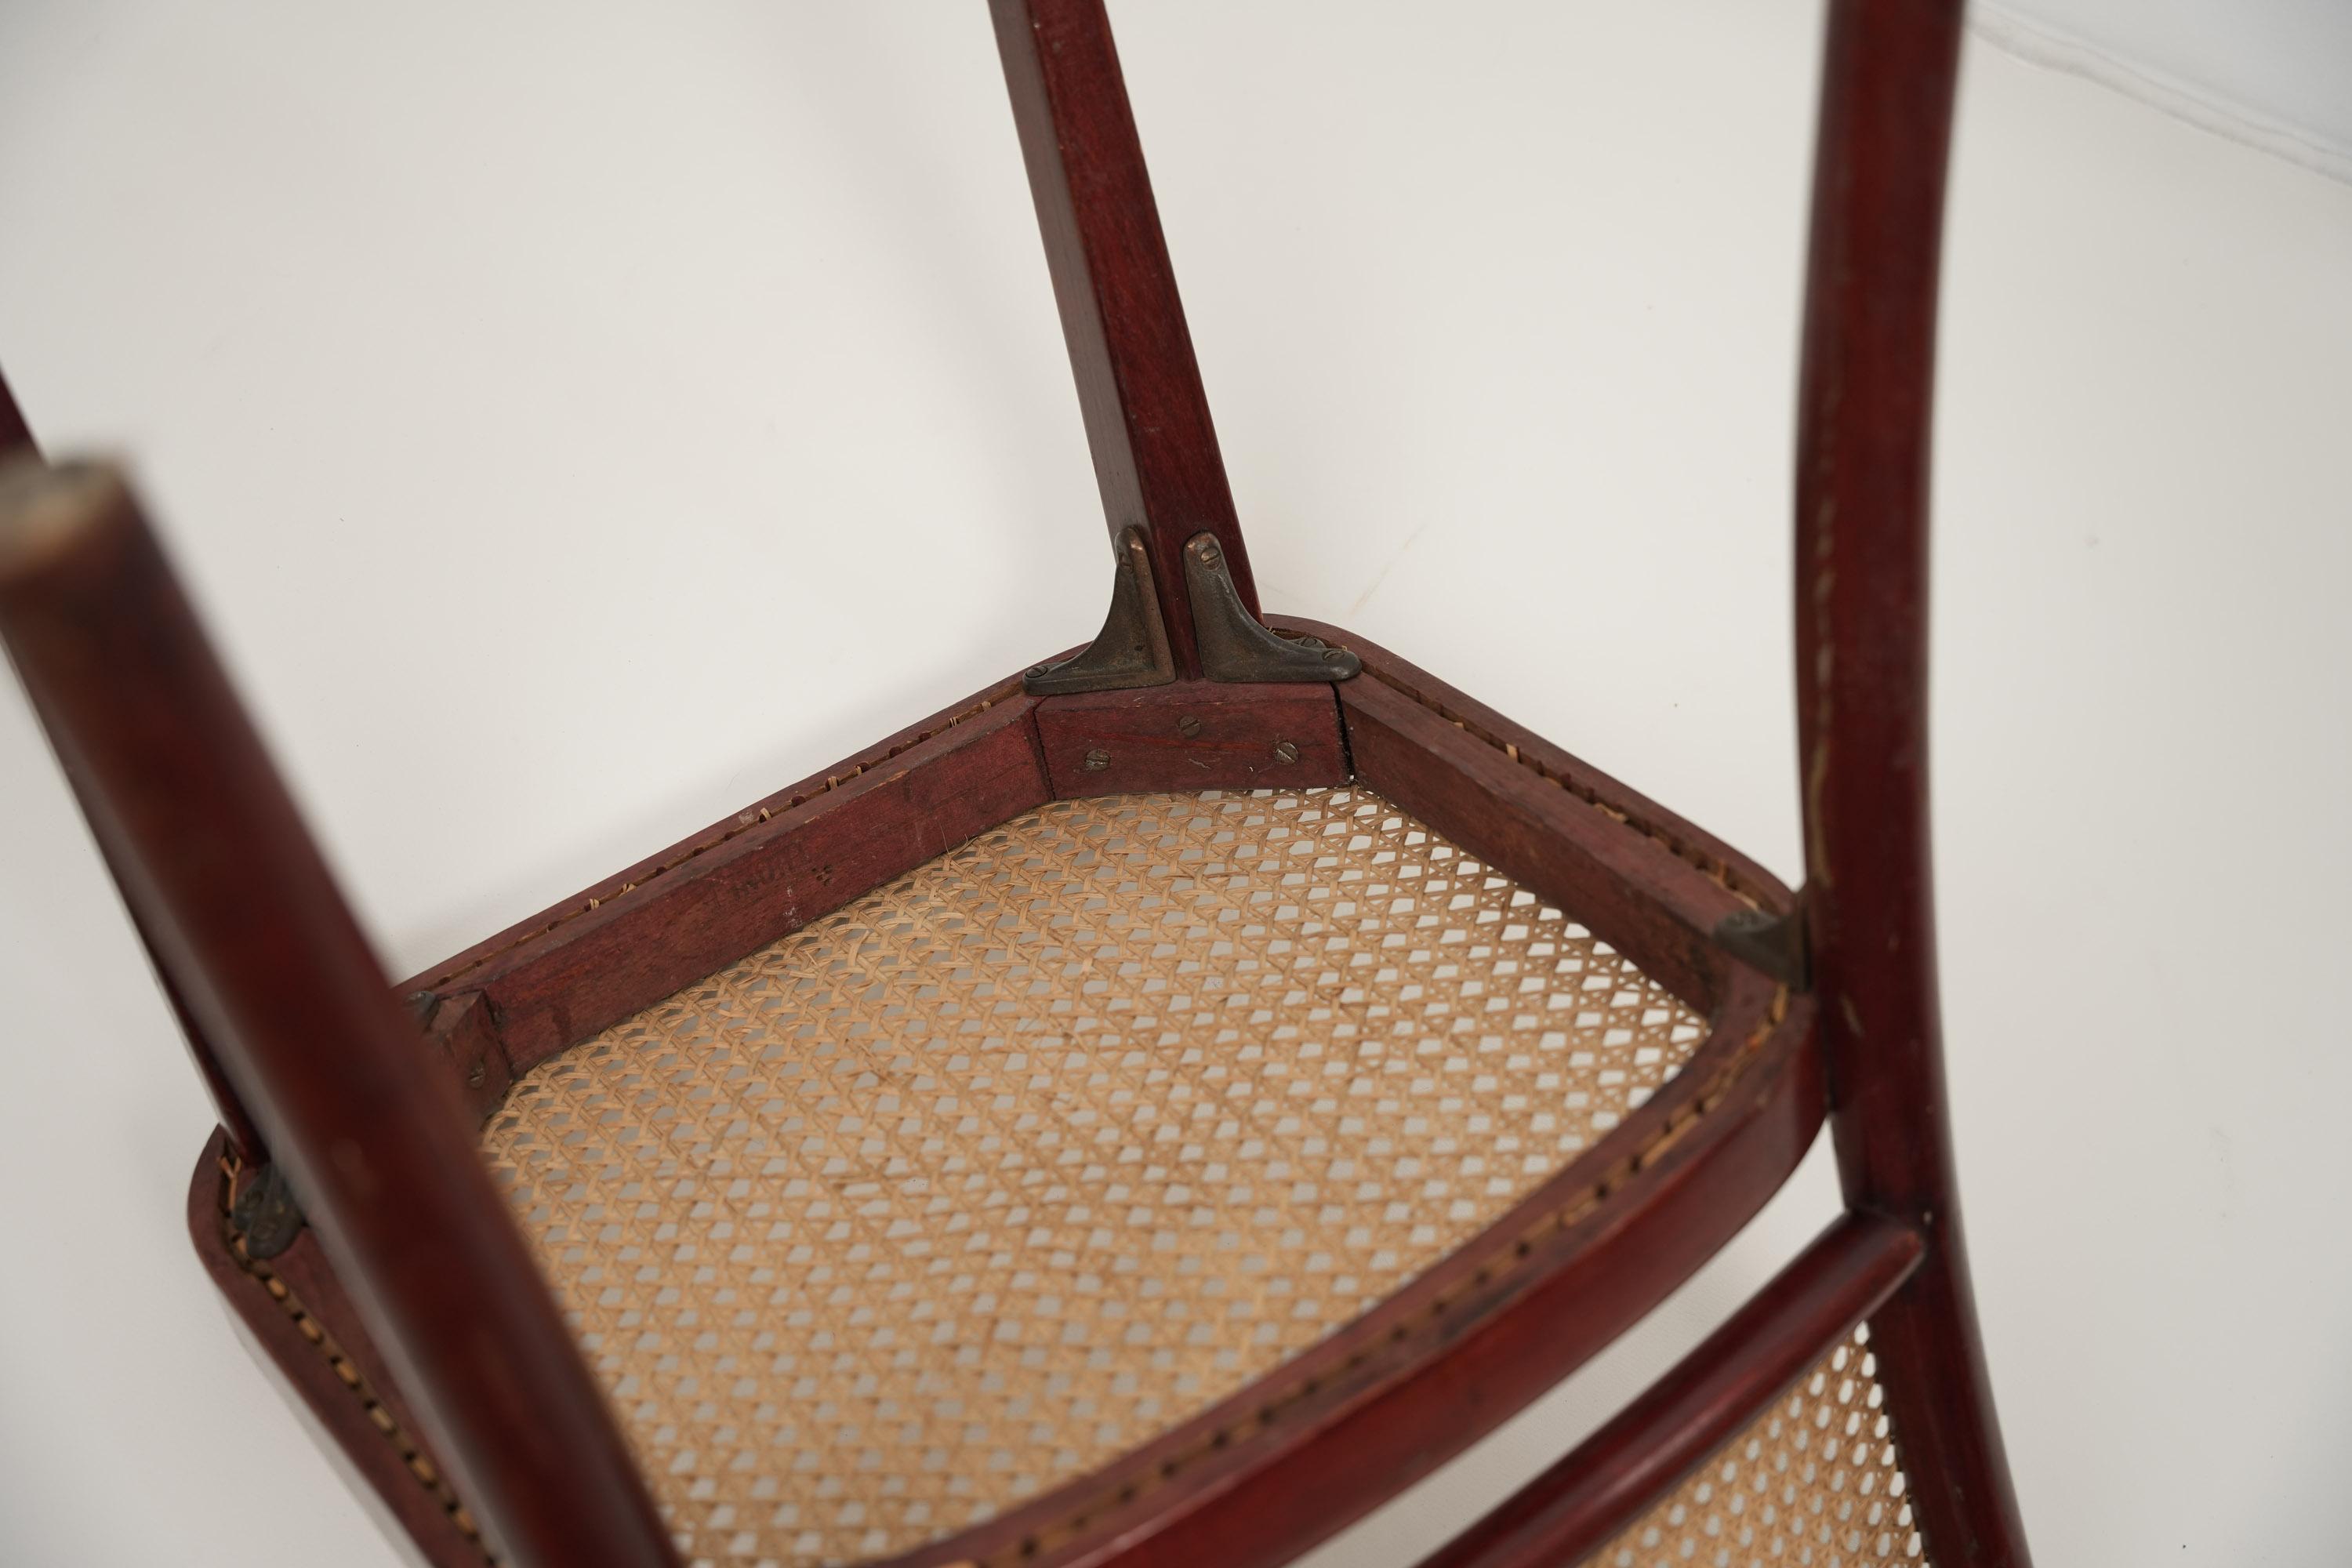 A 811 Chair By Josef Hoffmann or Josef Frank for Thonet 1920s In Fair Condition For Sale In Čelinac, BA